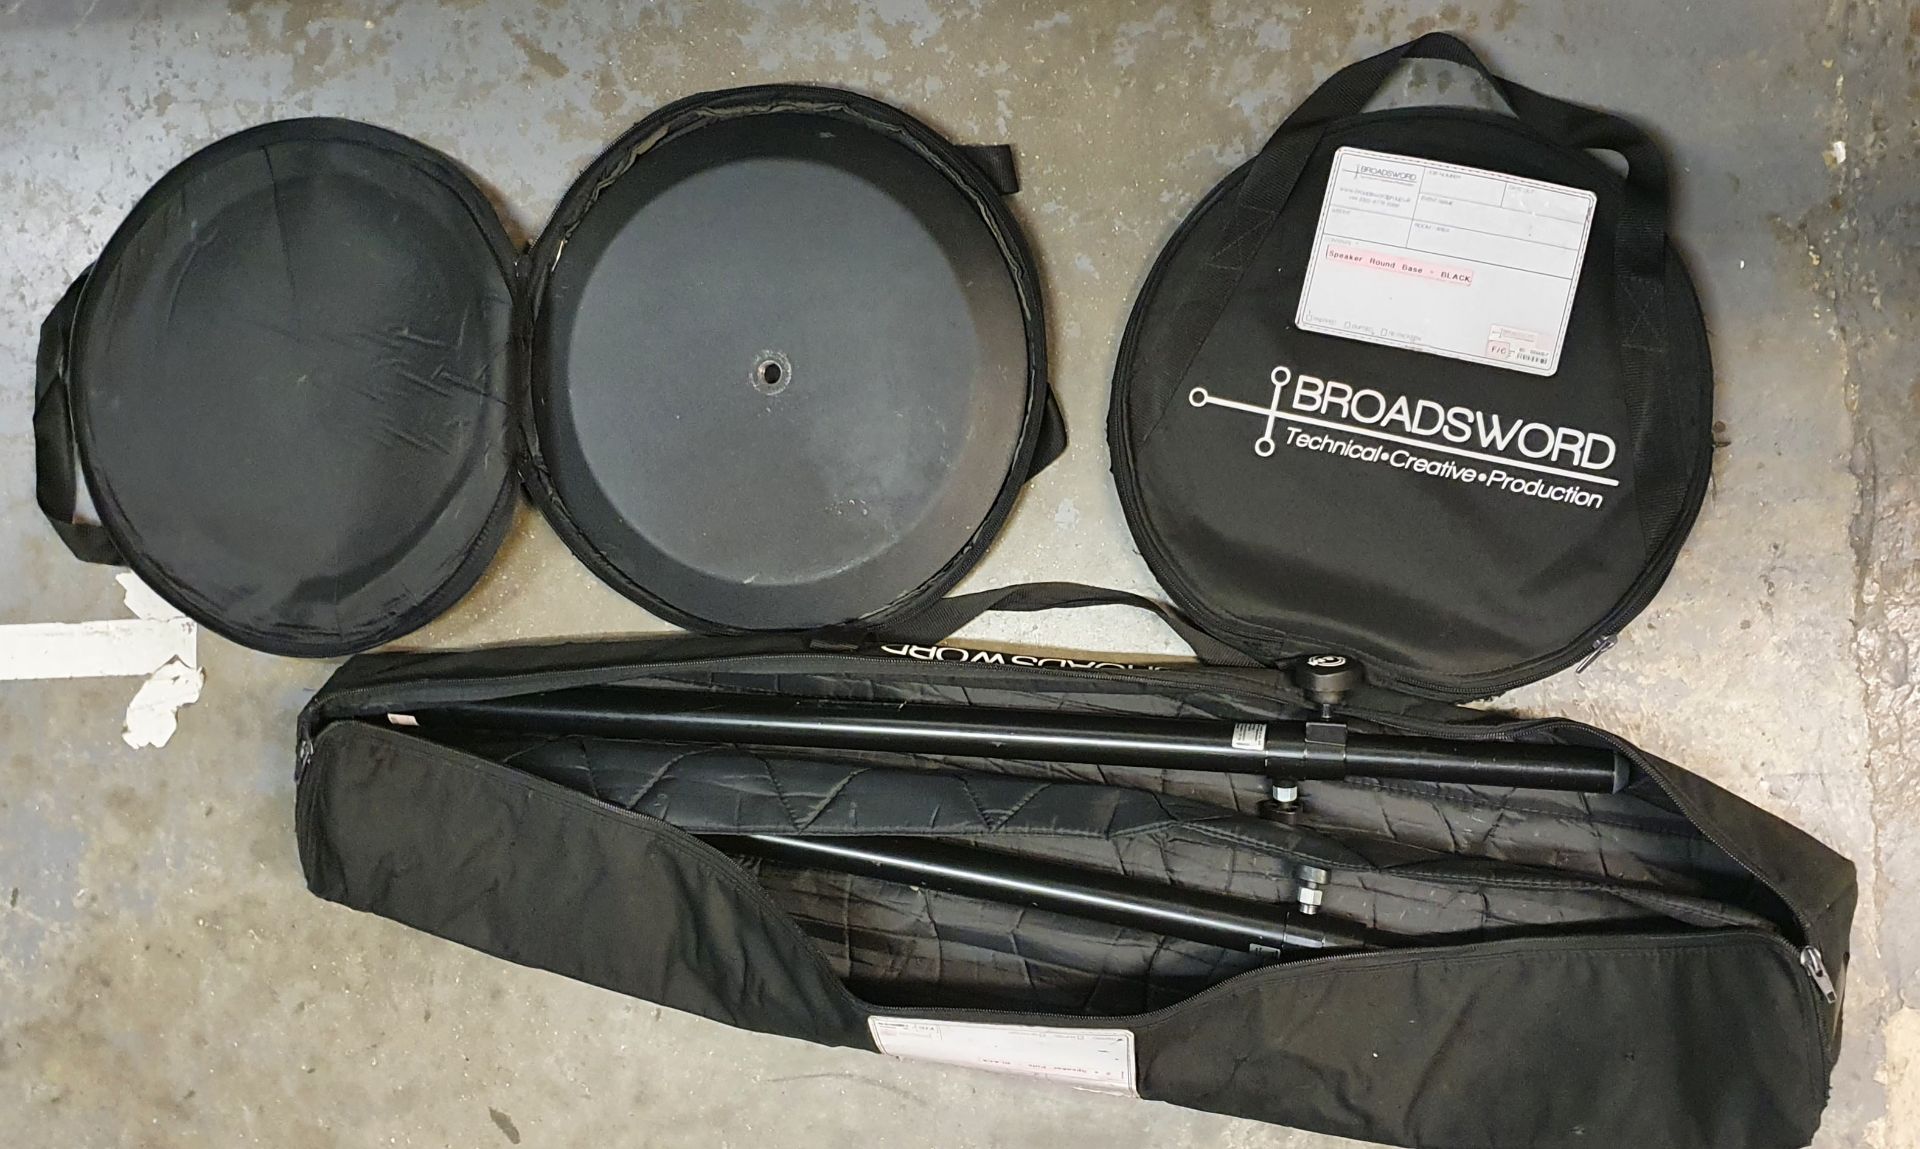 A Pair of K+M Black Speaker Round Base Stands comprising: 2 poles and 2 bases with carry bags. - Image 2 of 2